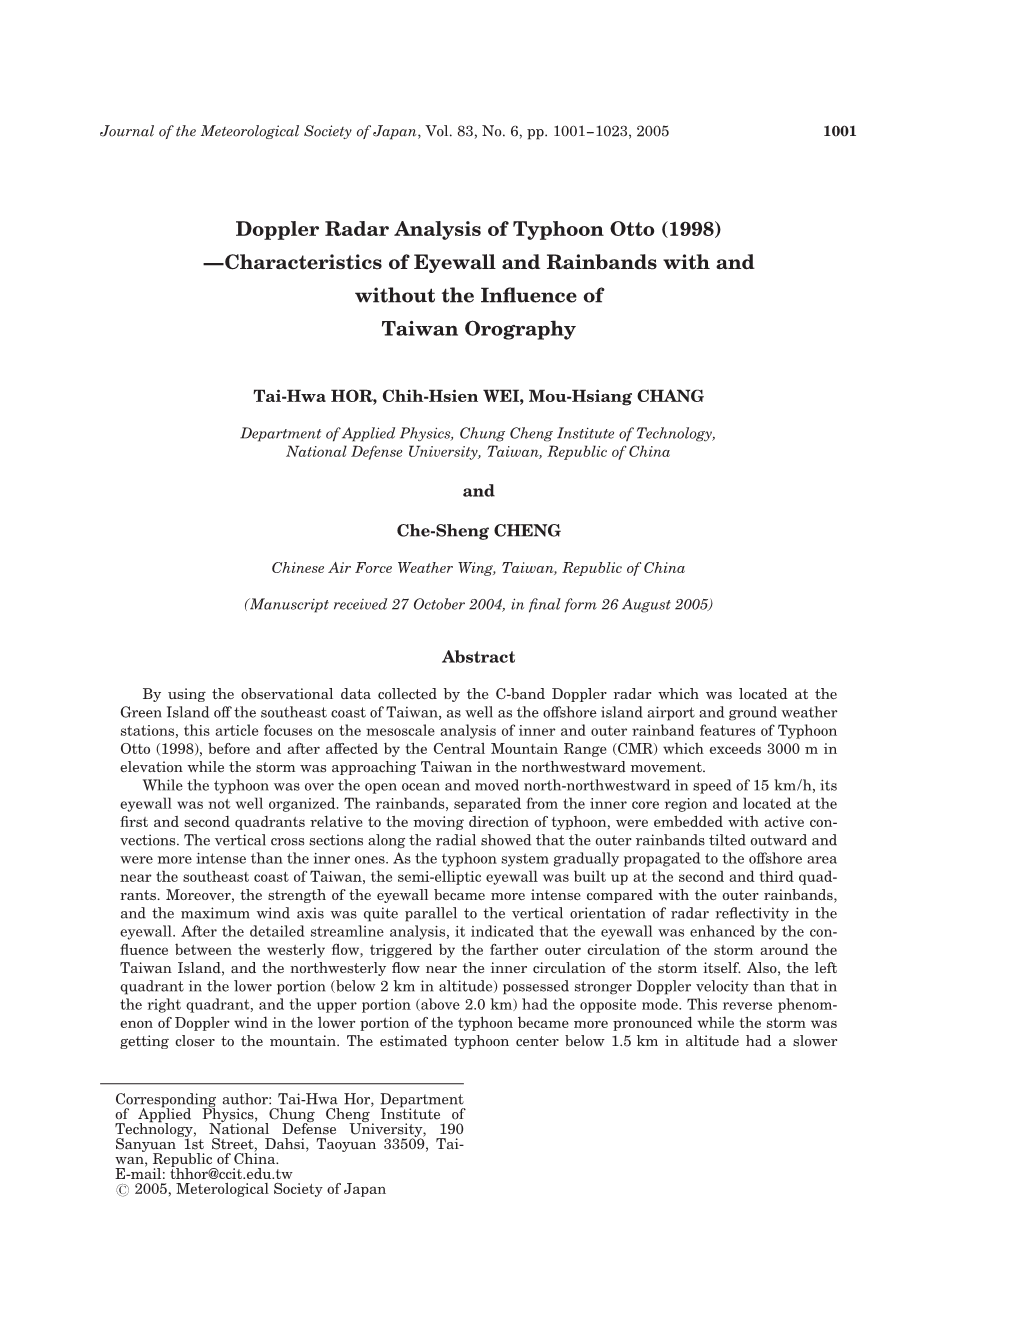 Doppler Radar Analysis of Typhoon Otto (1998) —Characteristics of Eyewall and Rainbands with and Without the Influence of Taiw